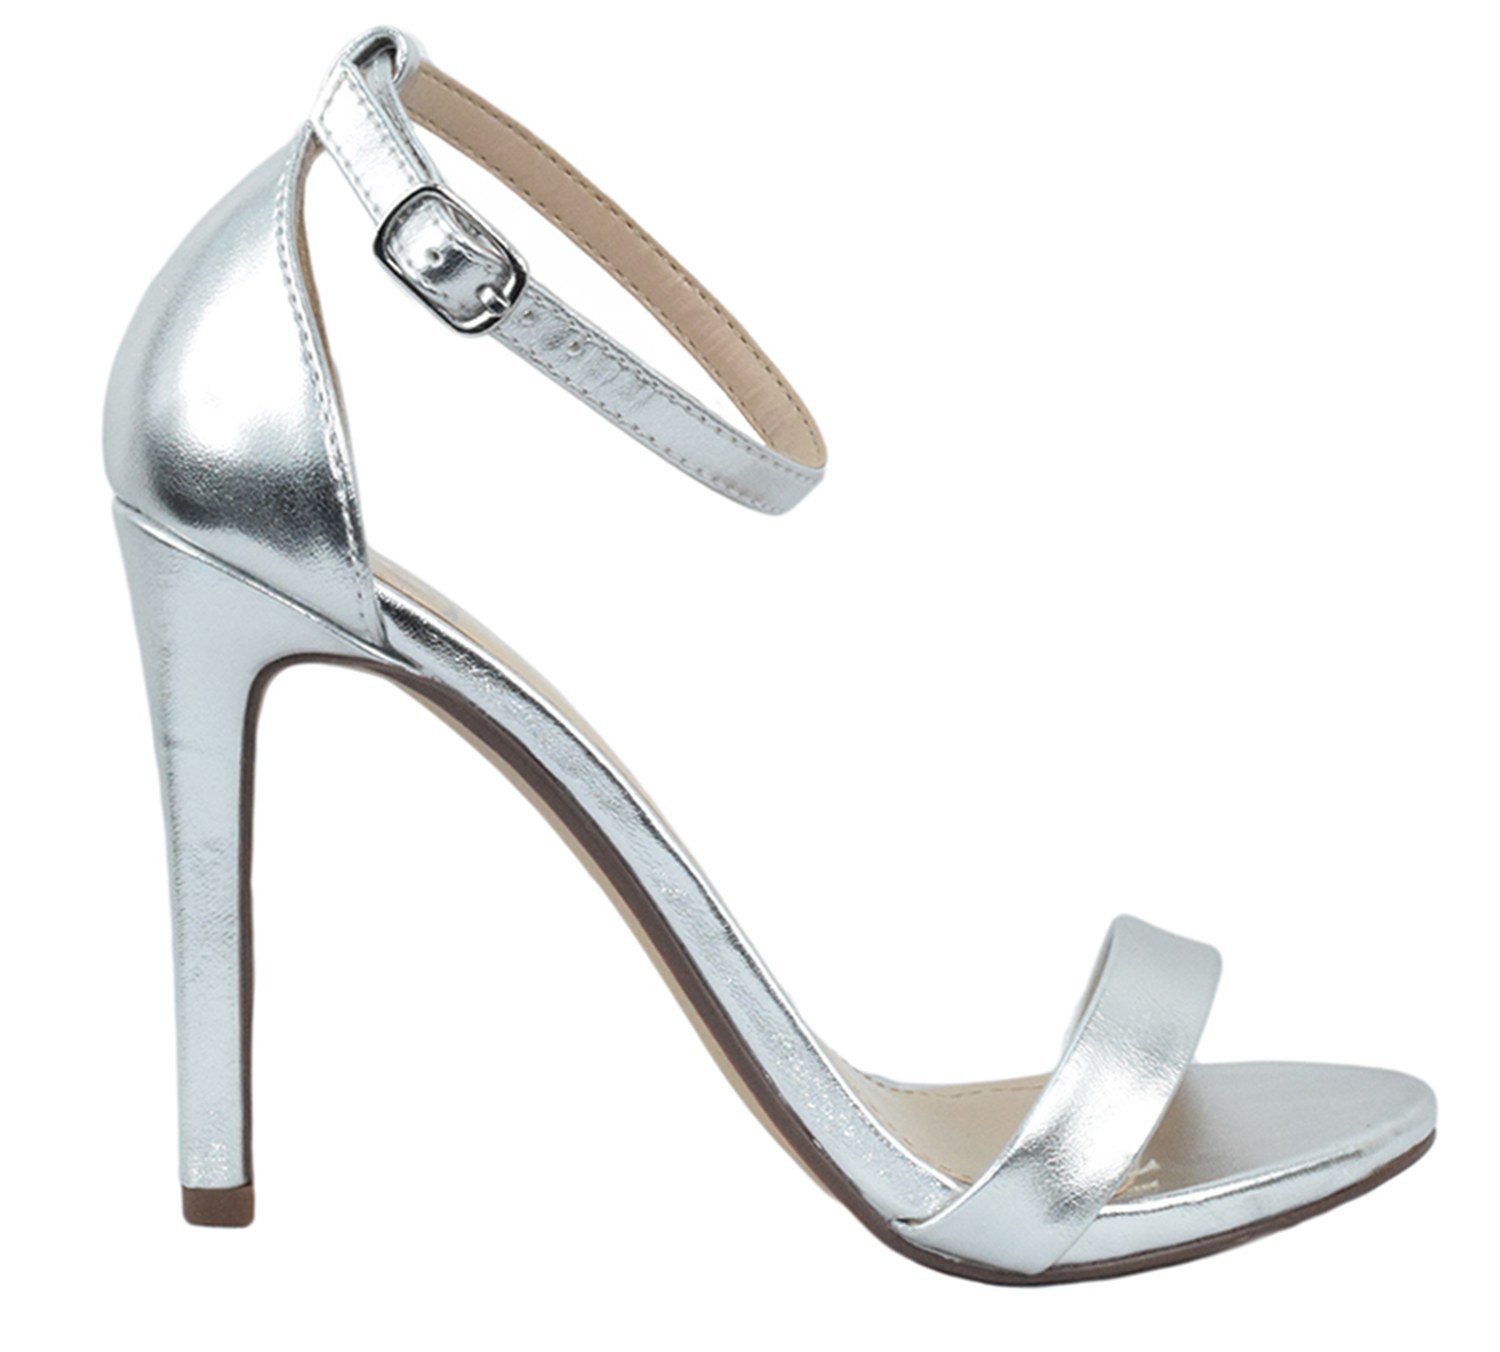 Delicious Shoes Women Ankle Strap High Heel Open Toe Formal/Casual Dress Sandals JAIDEN Metallic Silver 8 - image 2 of 2